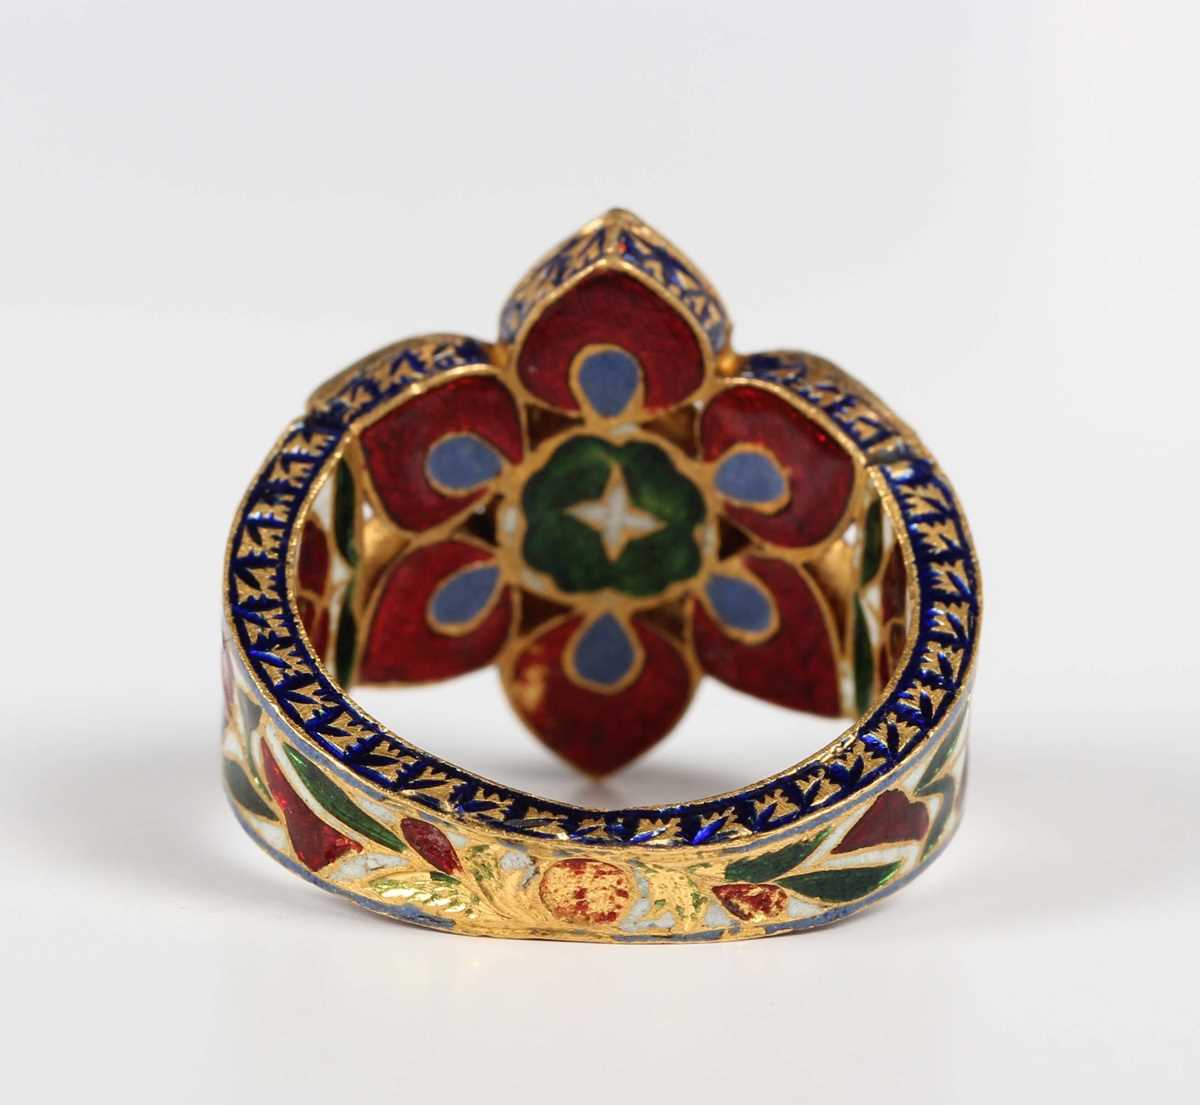 A Middle Eastern gold, ruby, diamond and varicoloured enamelled ring, probably Indian, designed as a - Image 4 of 6